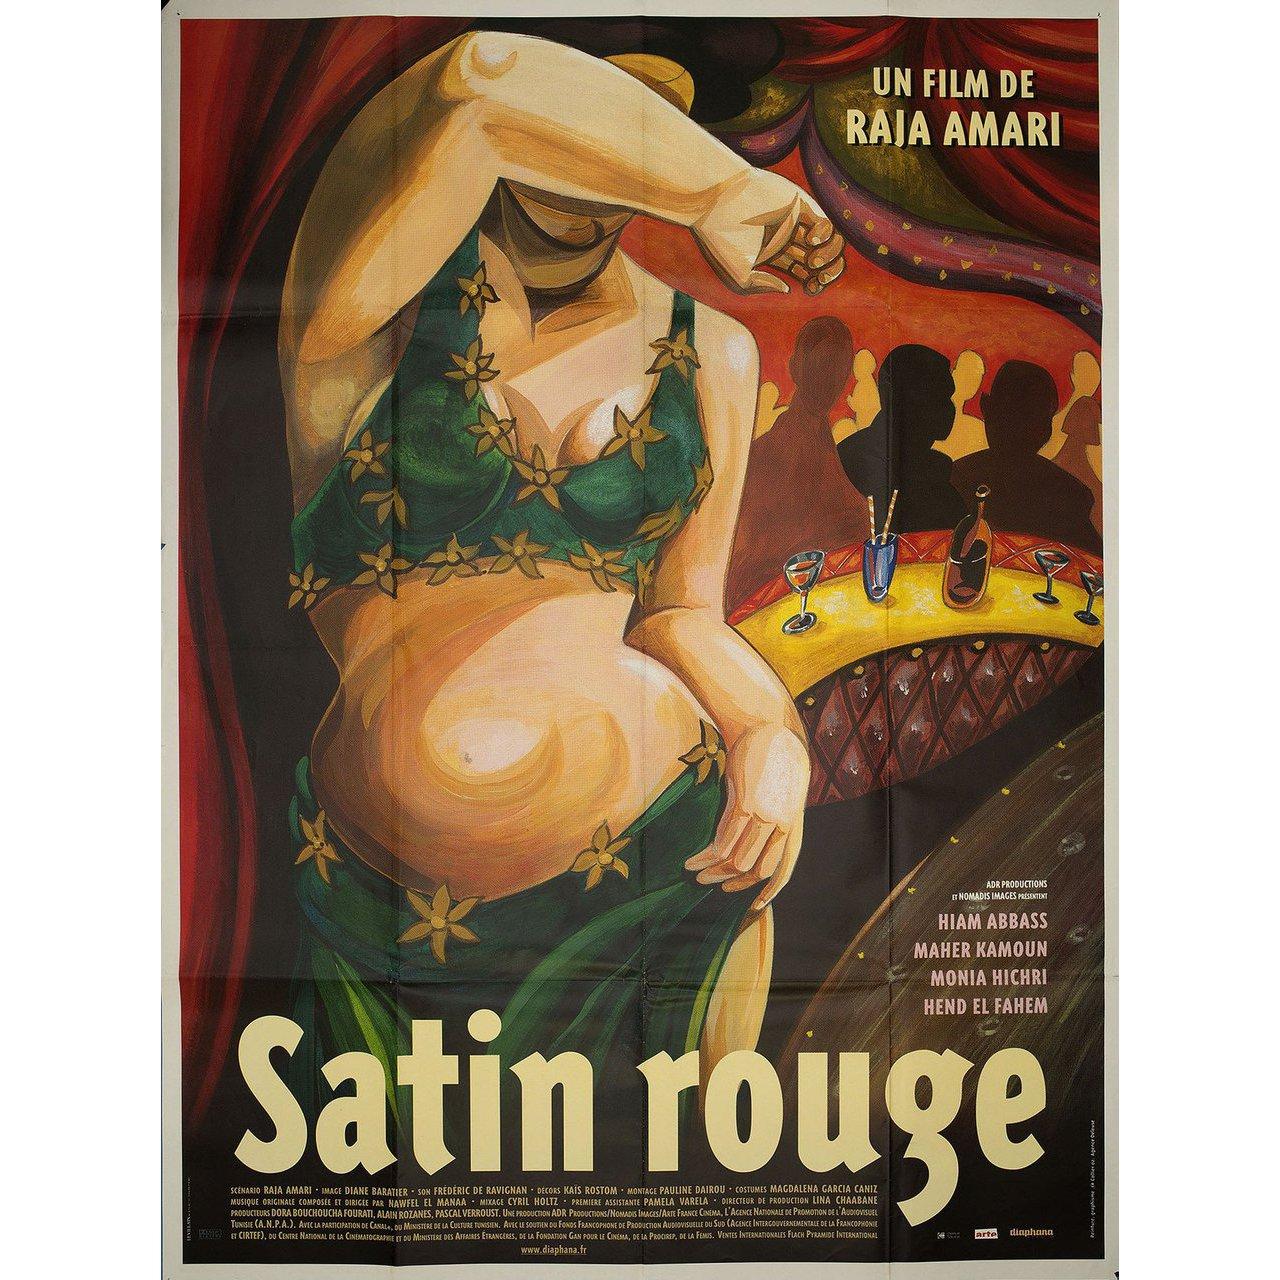 Original 2002 French grande poster for the film Satin Rouge (Red Satin) directed by Raja Amari with Hiam Abbass / Hend El Fahem / Maher Kamoun / Monia Hichri. Very good-fine condition, folded. Many original posters were issued folded or were